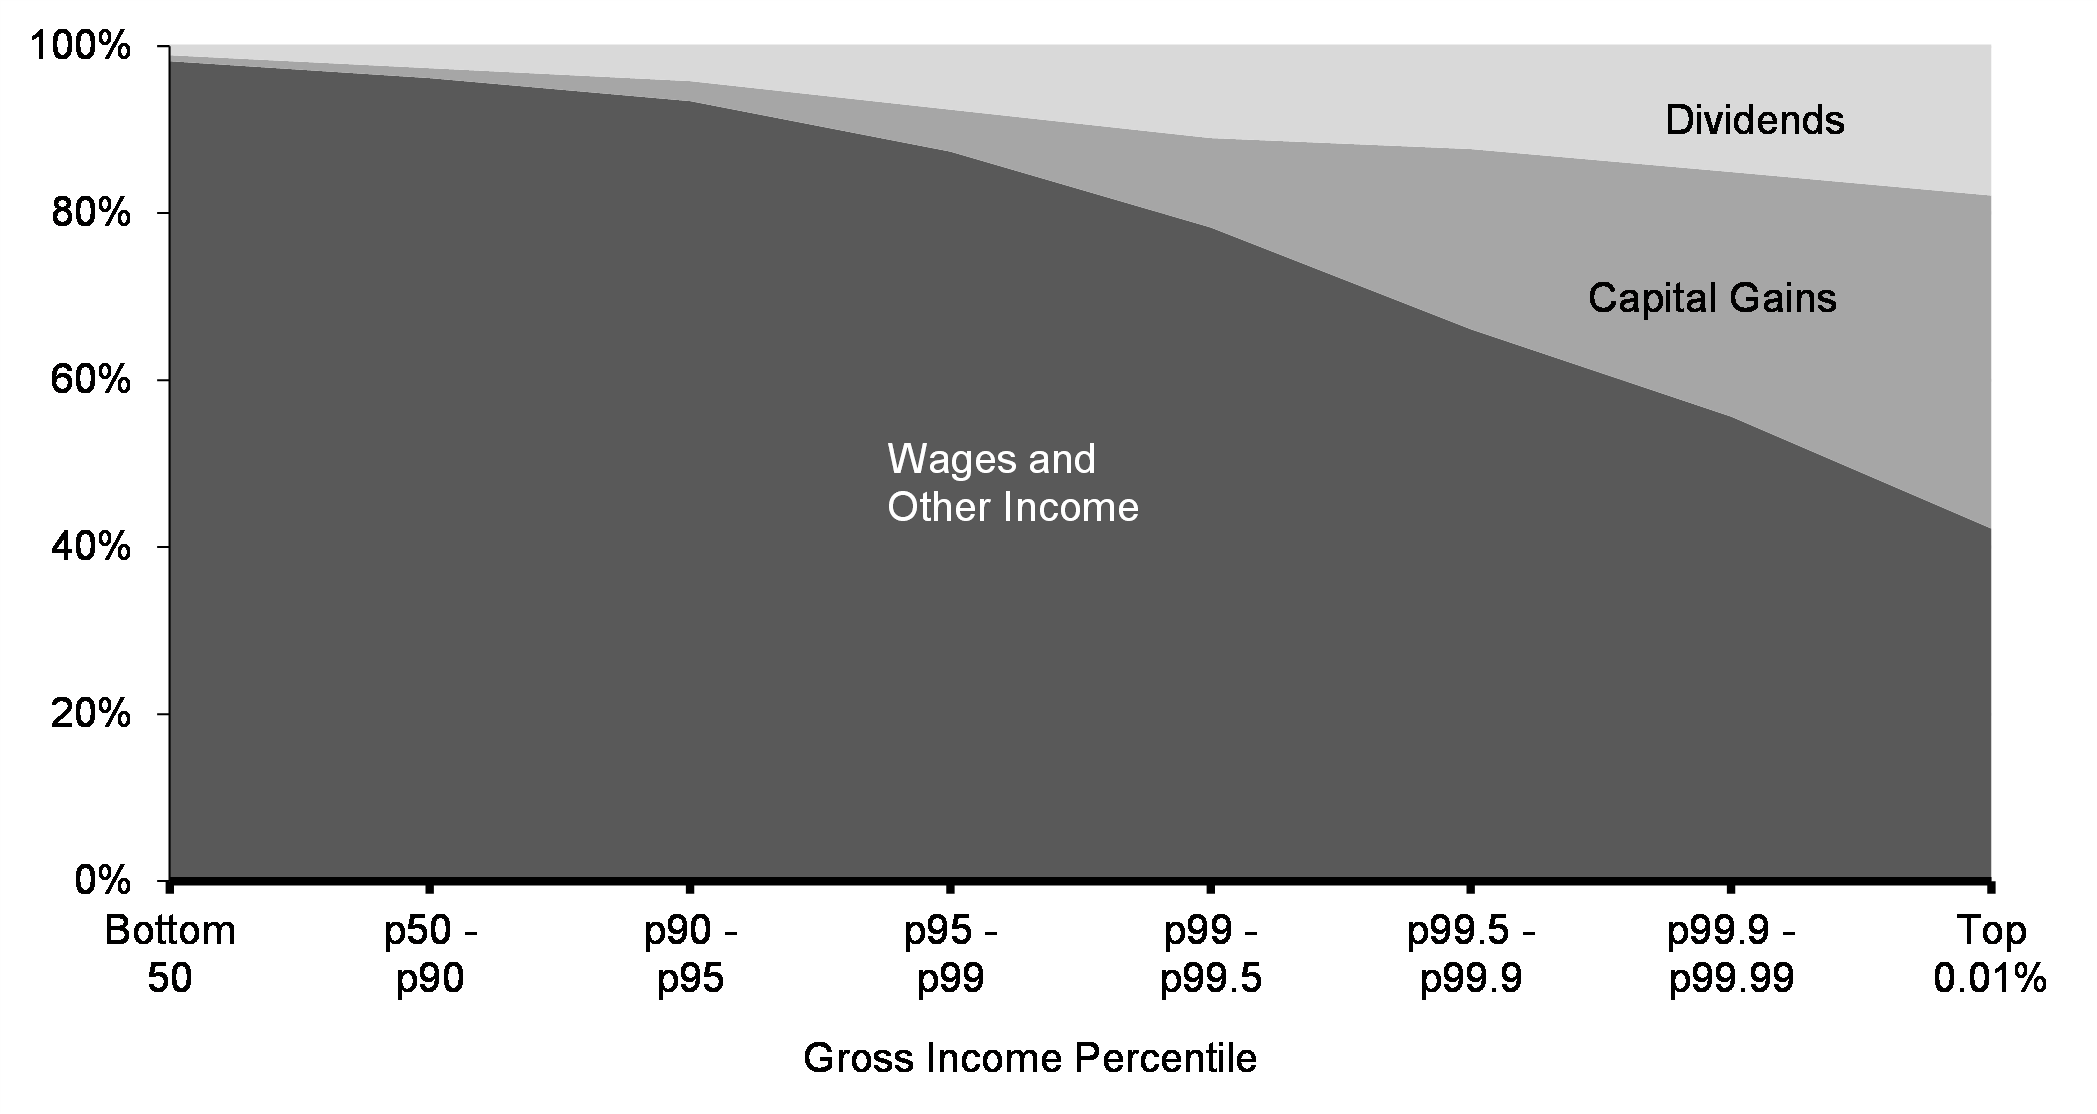 Chart 8.2: Capital Gains as a Share of    Gross Income by Income Percentile